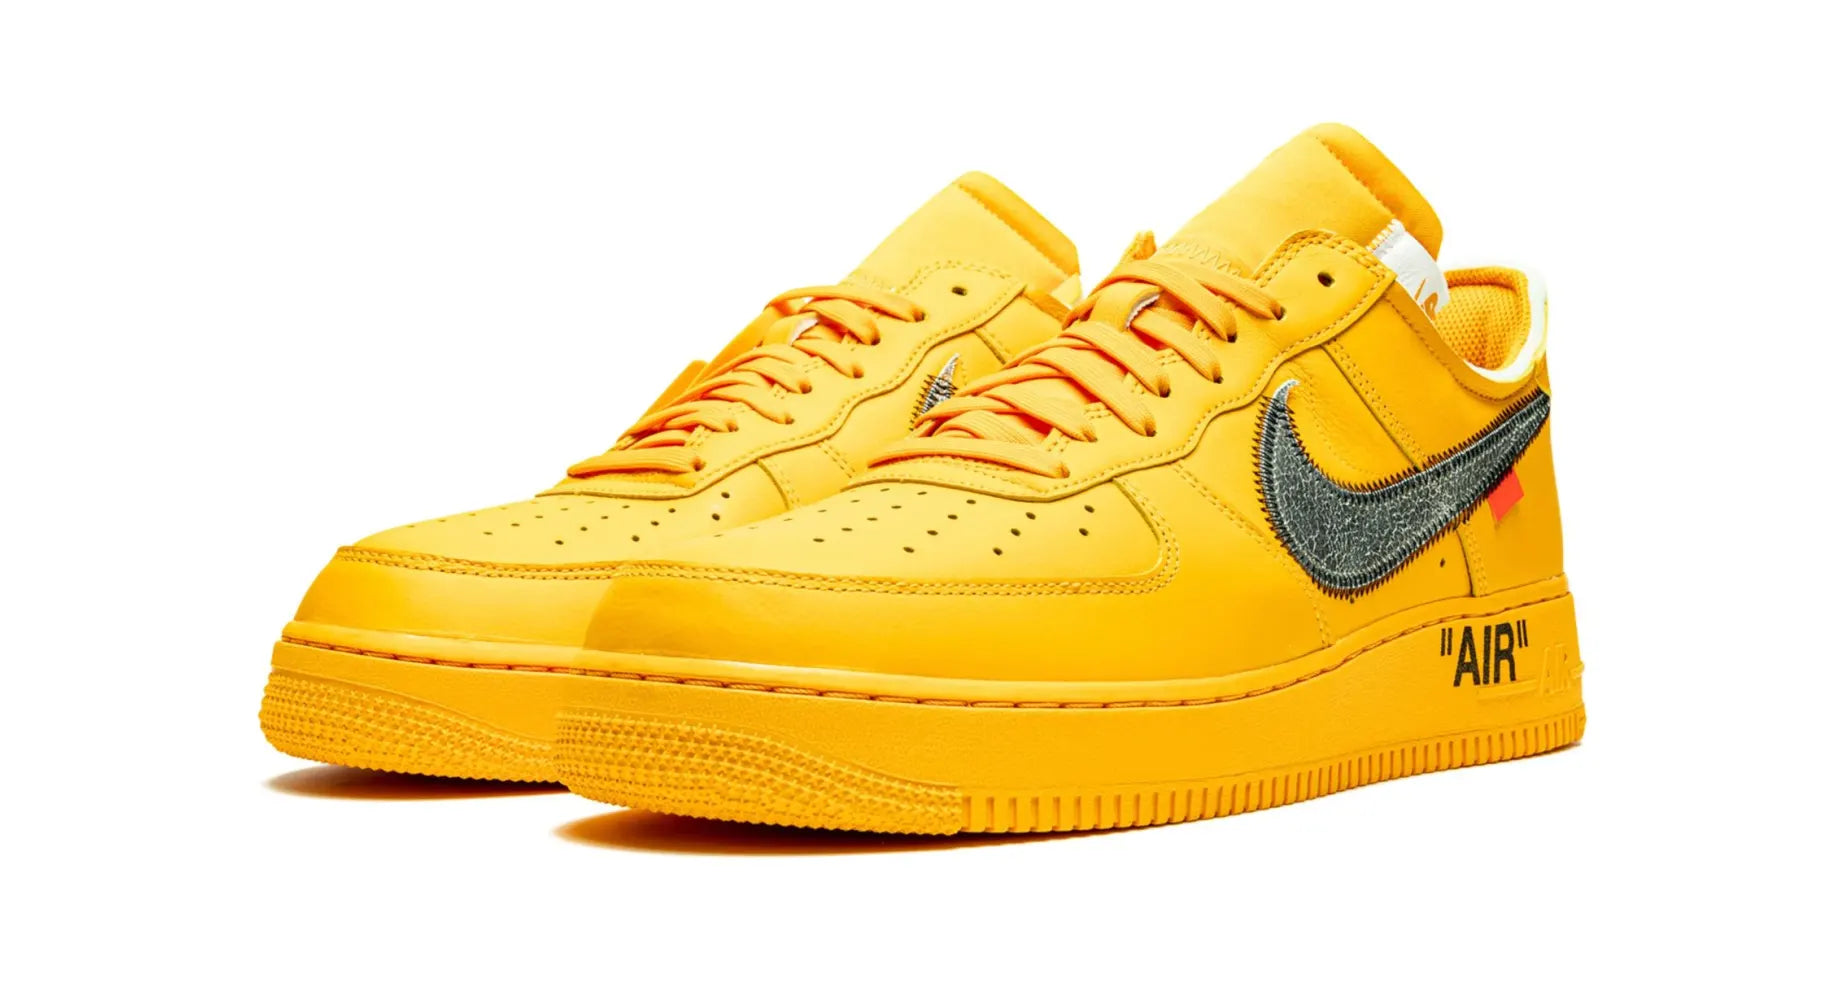 Up Close Look At The Off-White Nike AF1 ICA Universiry Gold